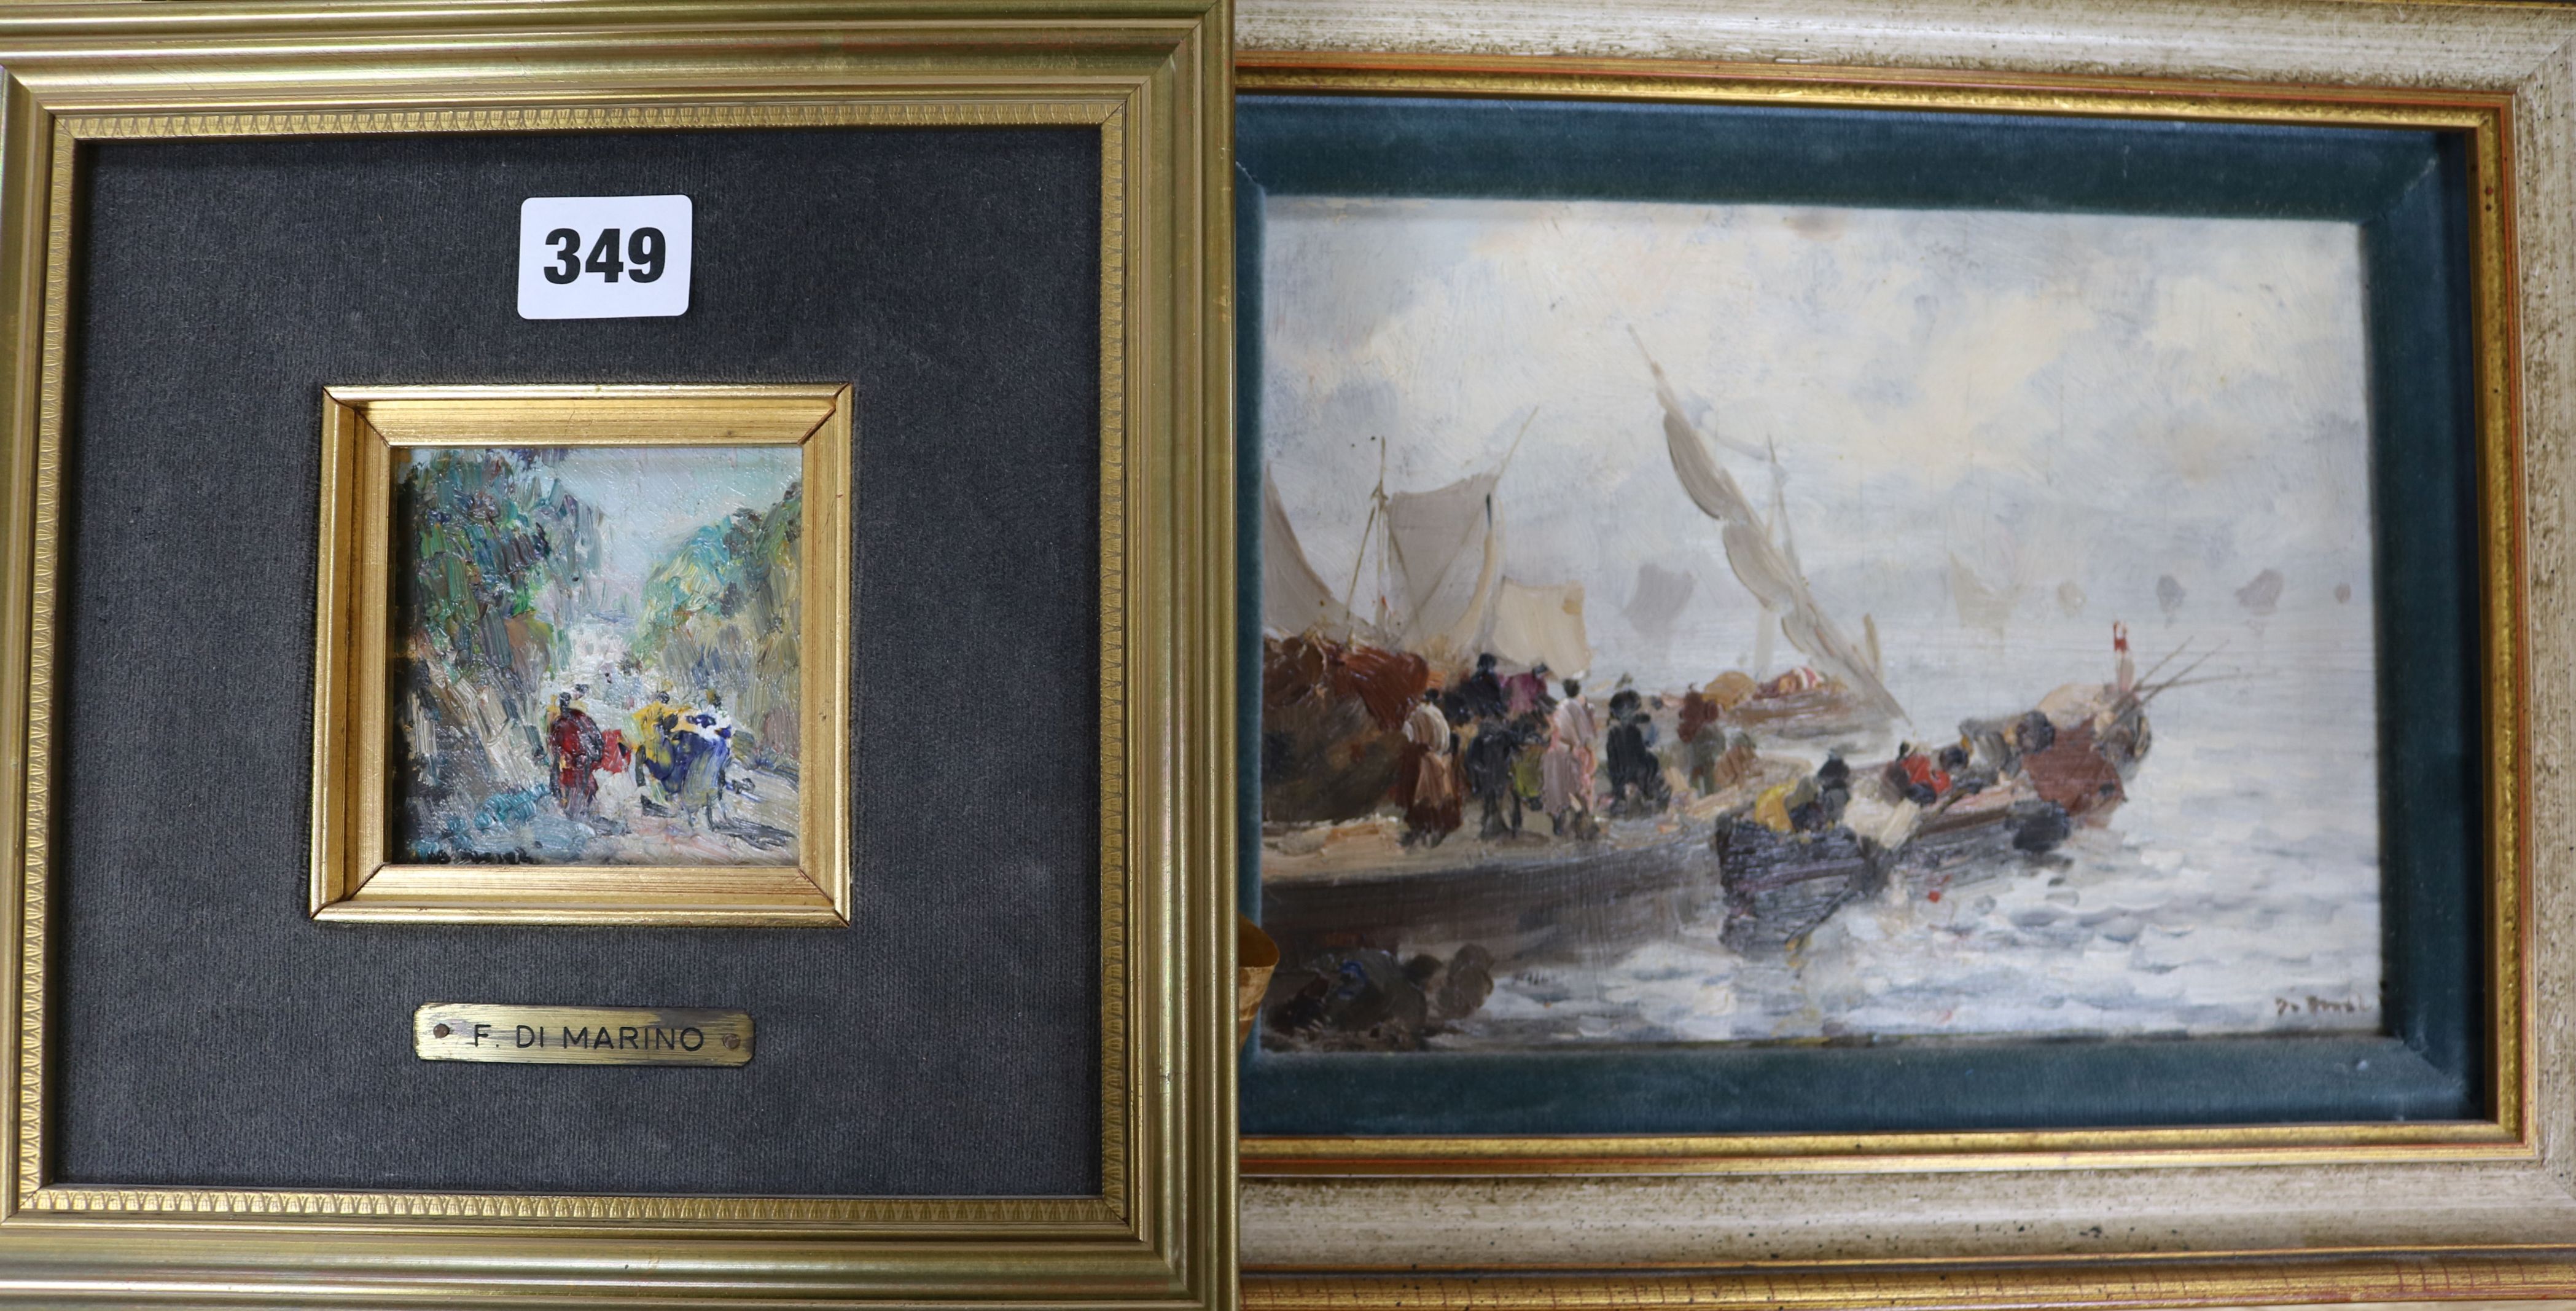 Francesco di Marinotwo oilsFisherfolk on the wharf and Street scene6.5 x 9in. and 3 x 3in.